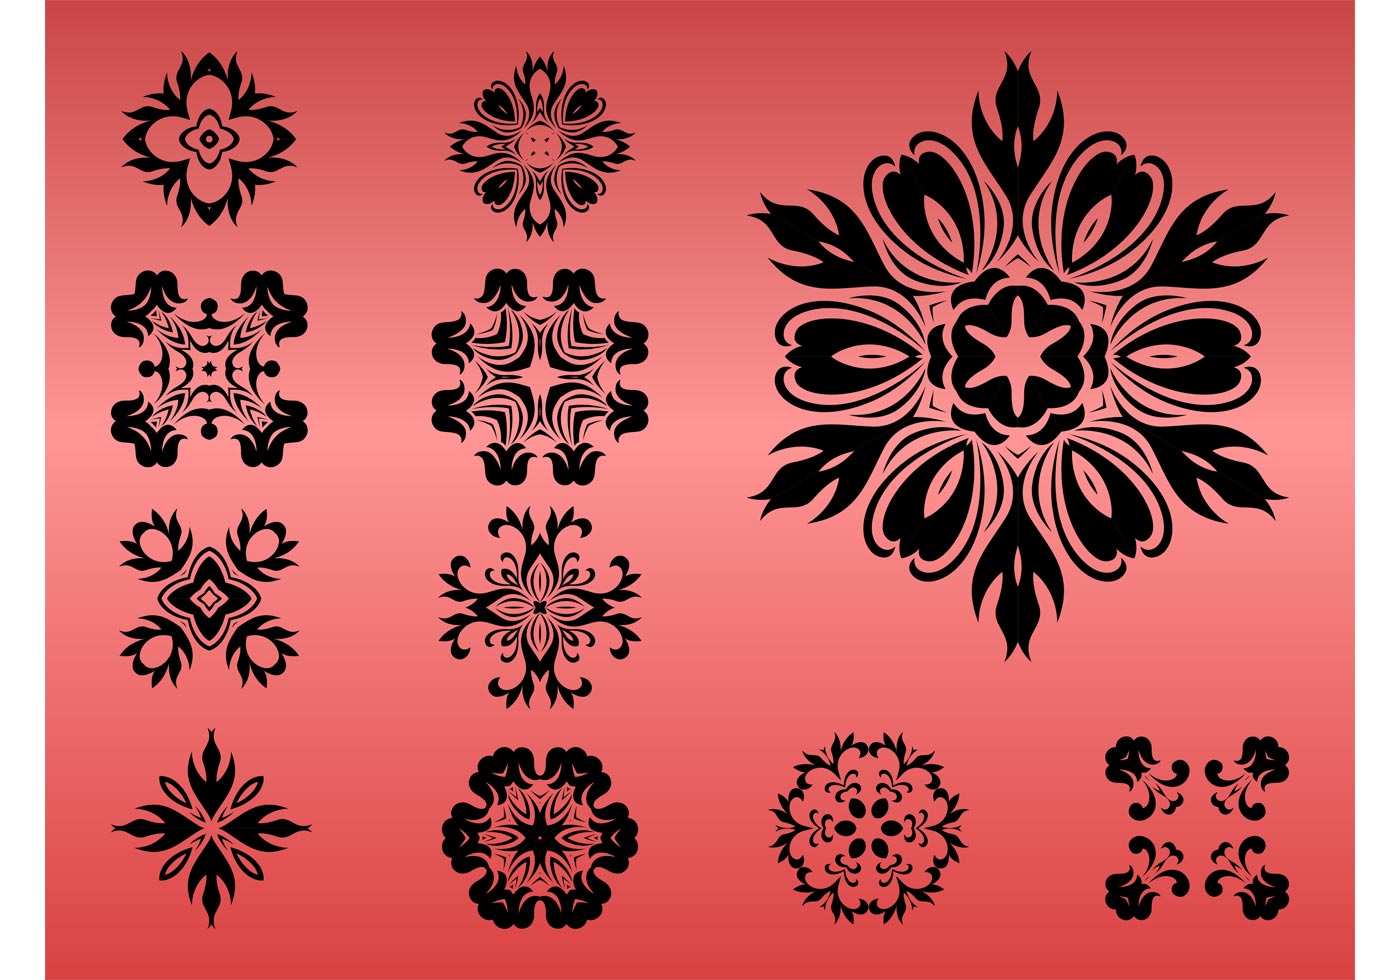 Download Round Floral Designs - Download Free Vector Art, Stock ...